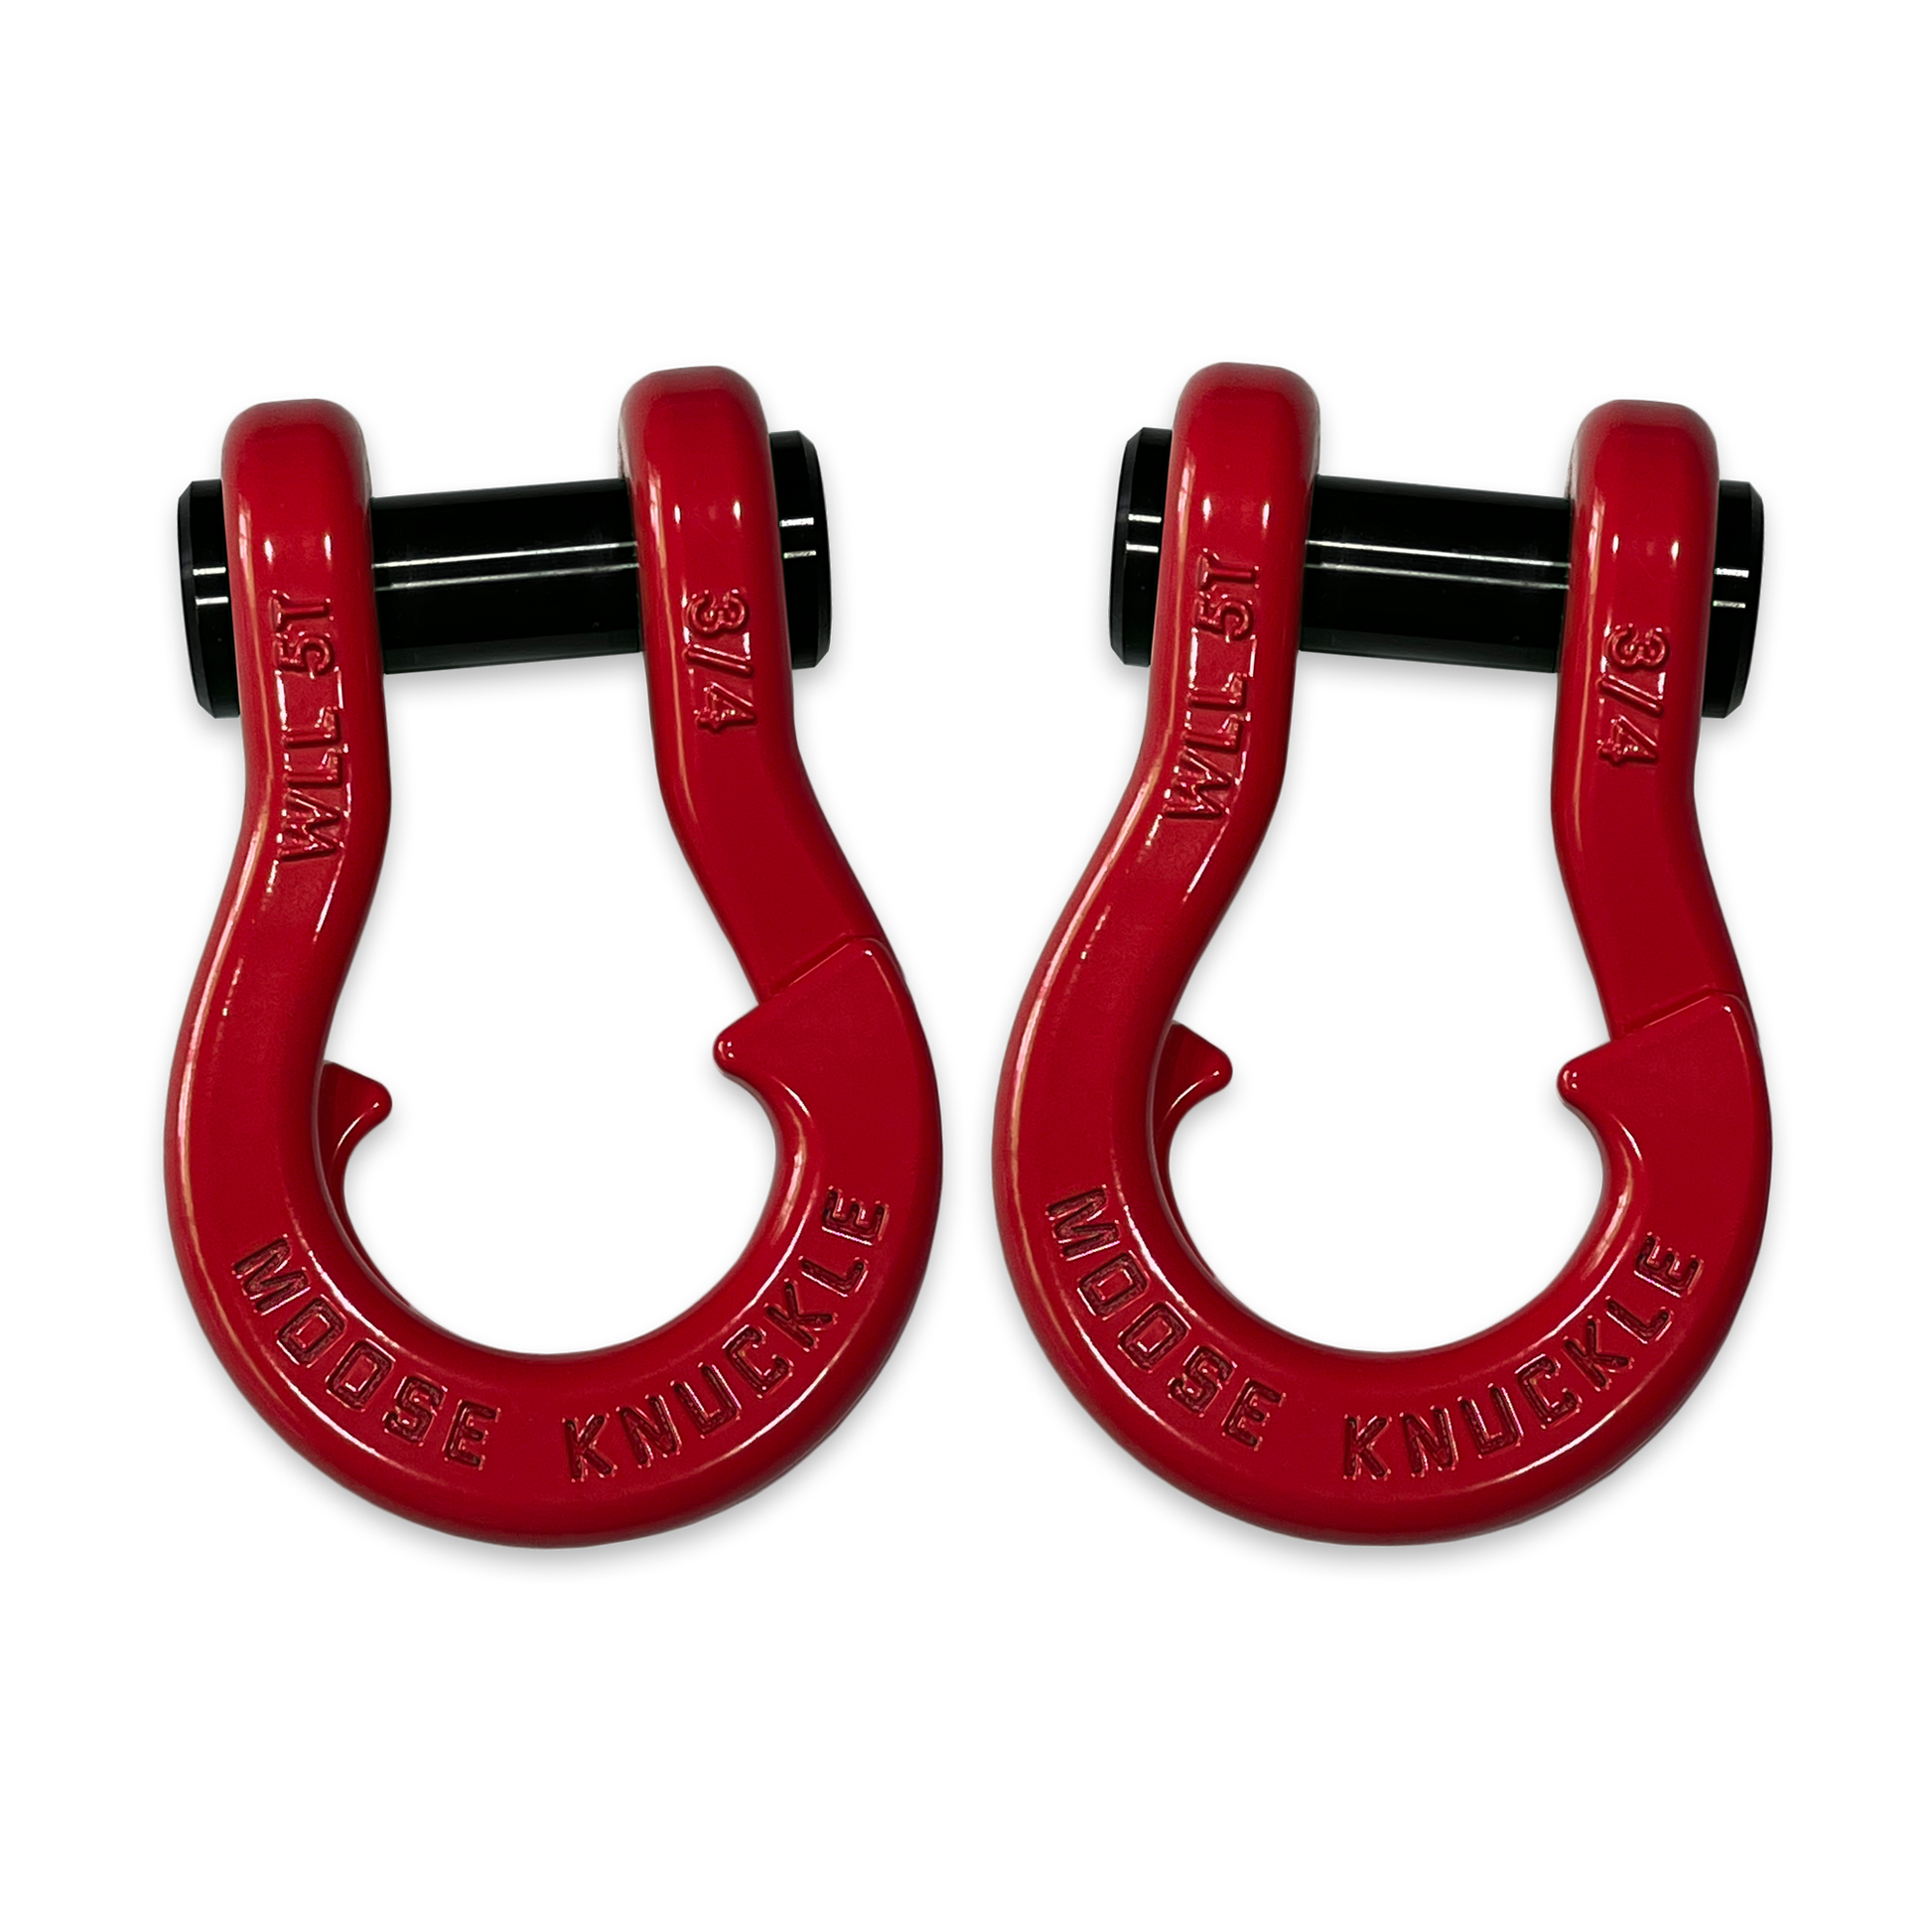 Moose Knuckle's Jowl Recovery Split Shackle 3/4 in Flame Red and Flame Red Combo